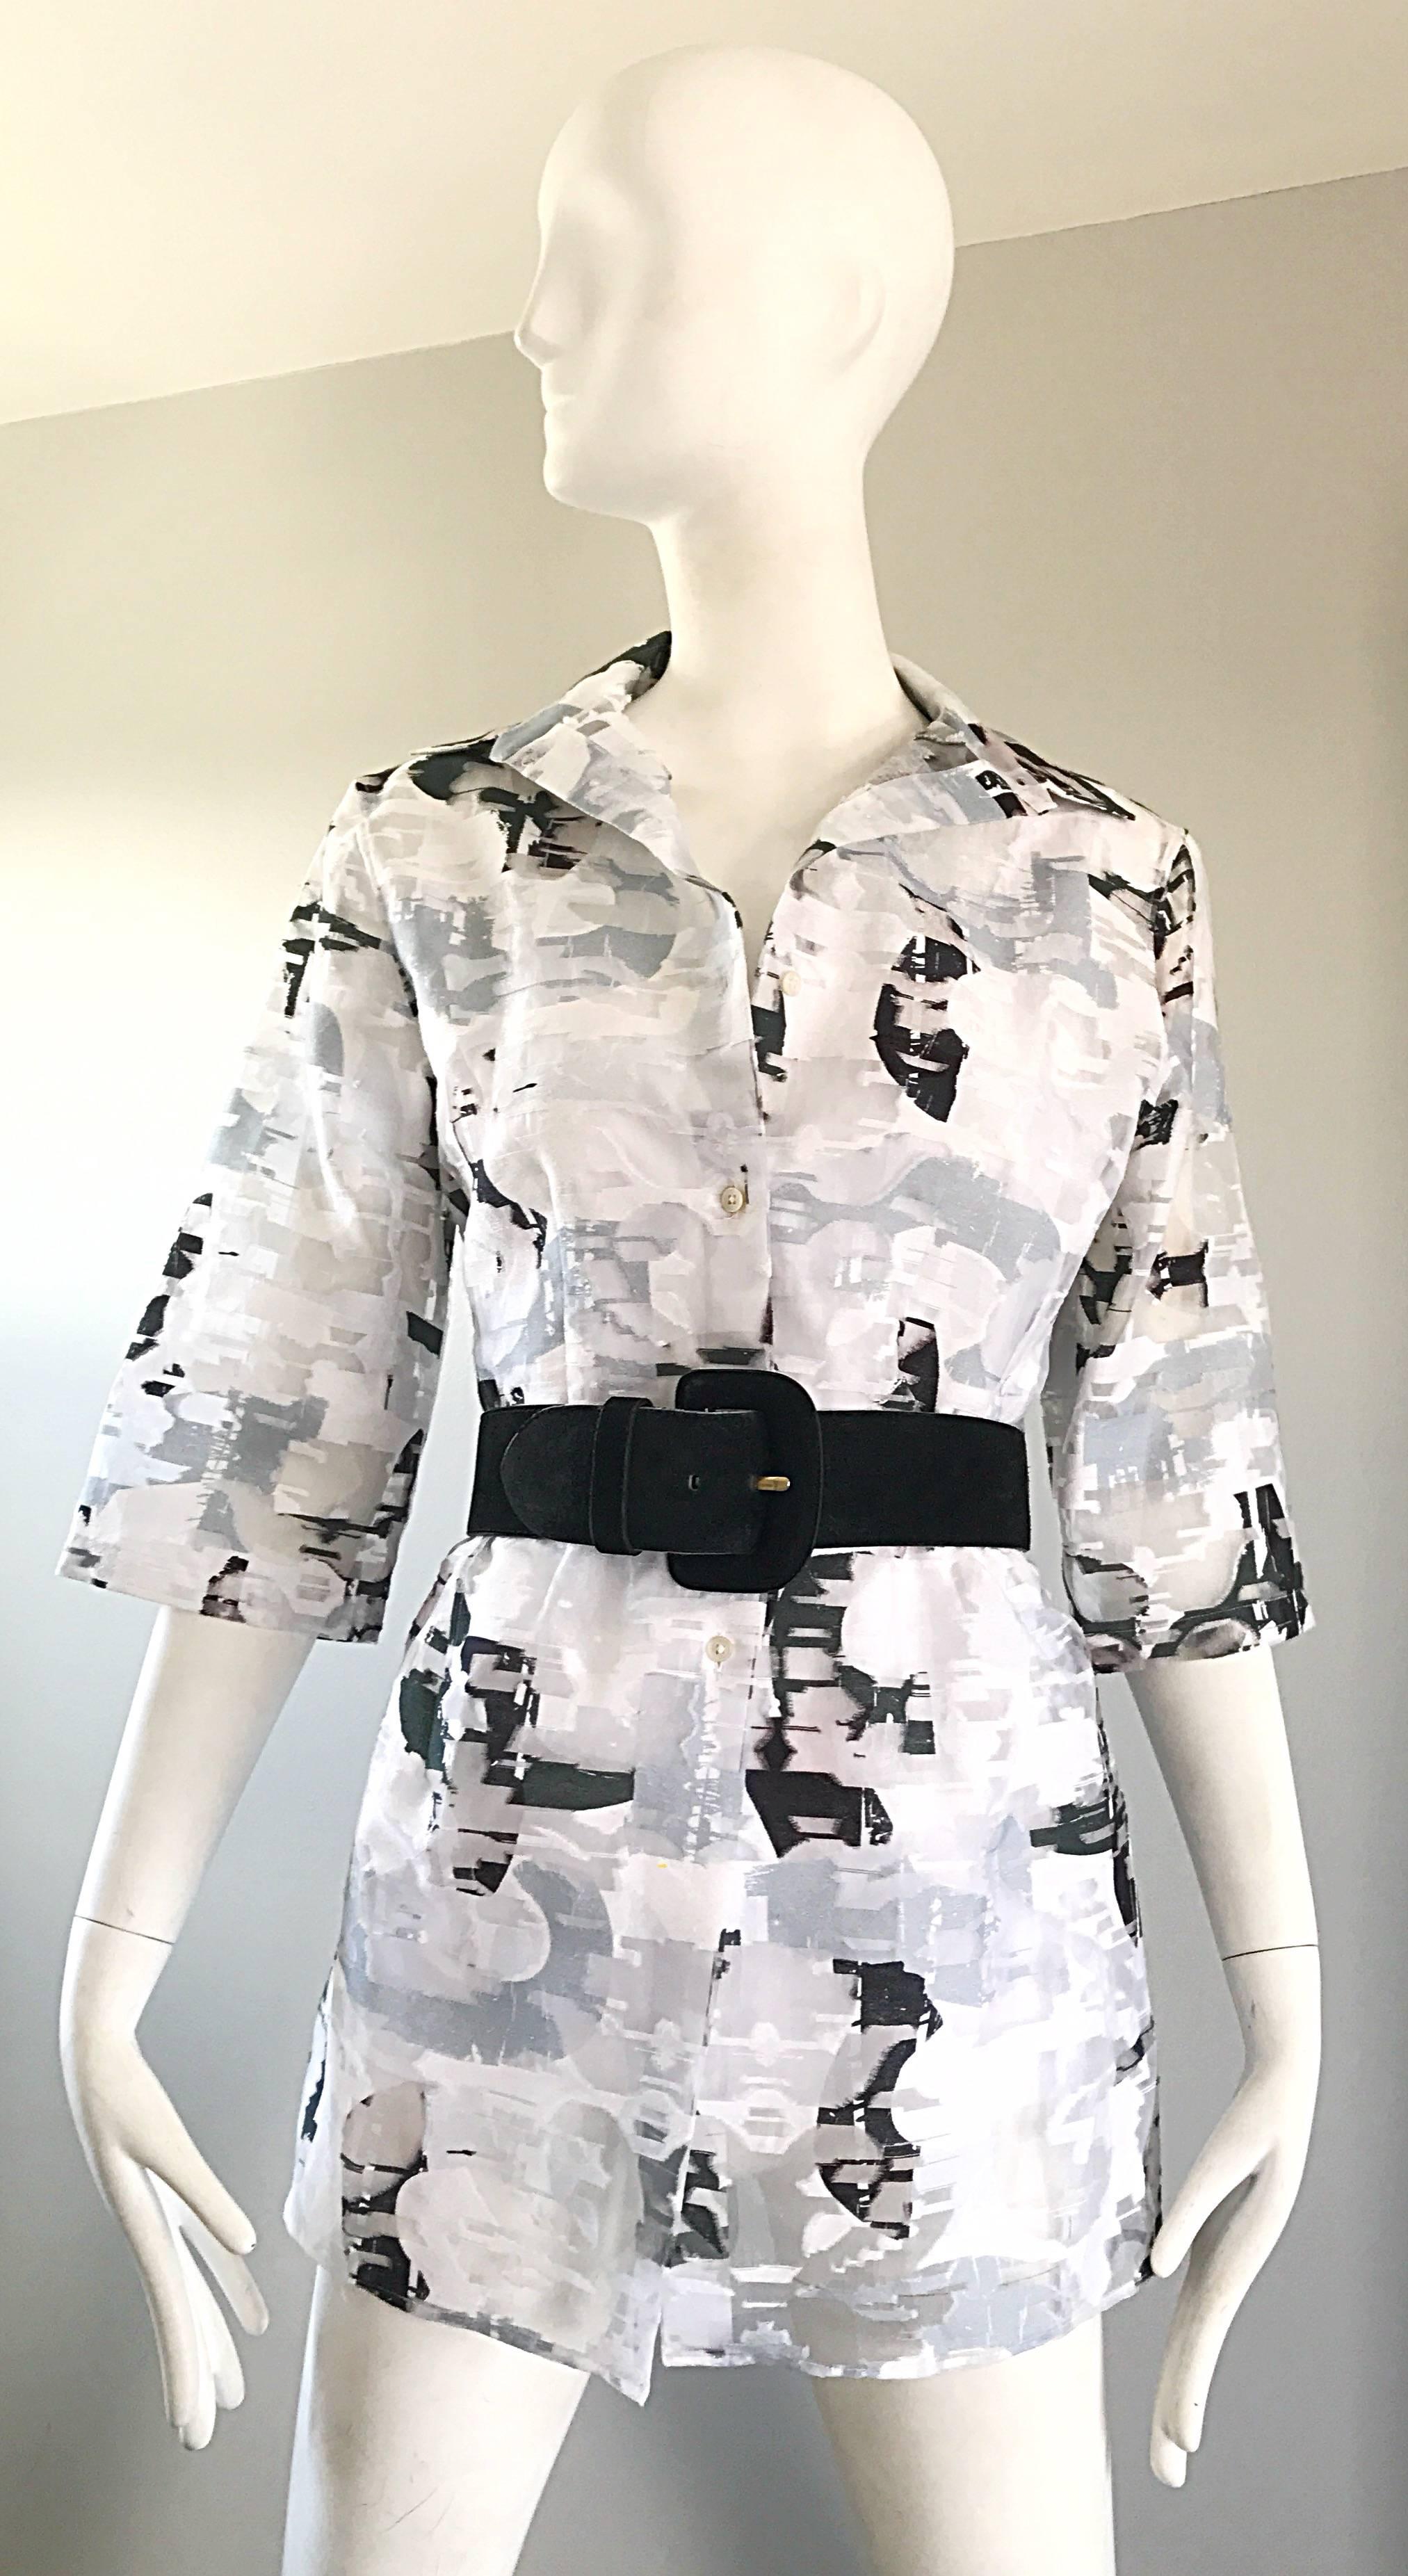 Brand new with tags vintage 90s JIL SANDER black, white and gray abstract print semi sheer blouse! Features a black and white abstract print with grey mixed in. Attached white interior shell. Buttons up the bodice. Great belted or alone. In great